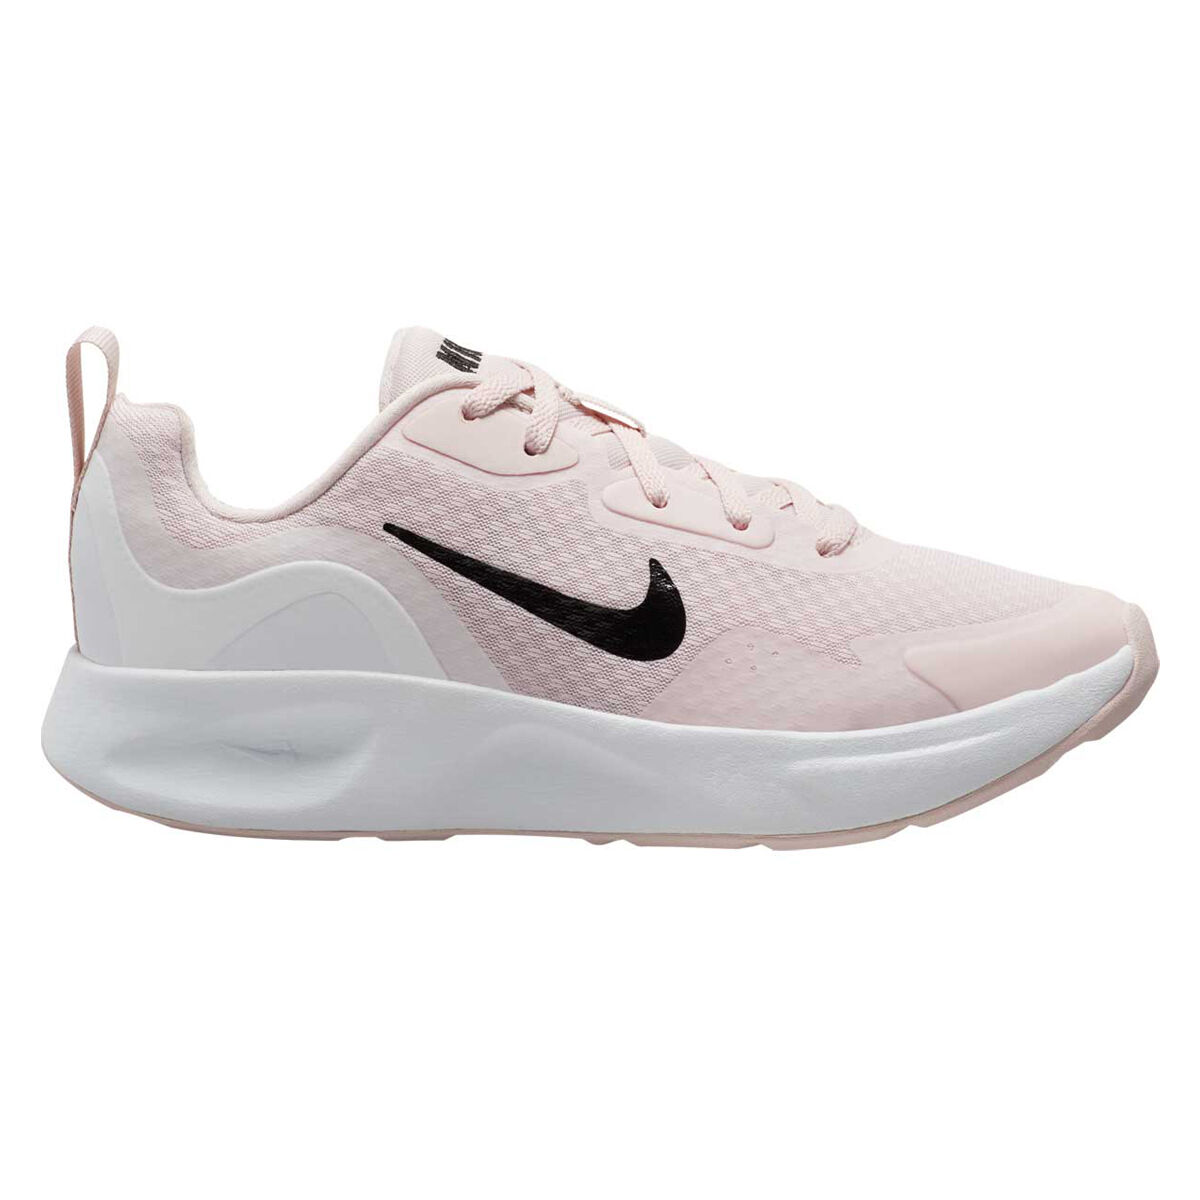 Nike Wearallday Womens Casual Shoes 